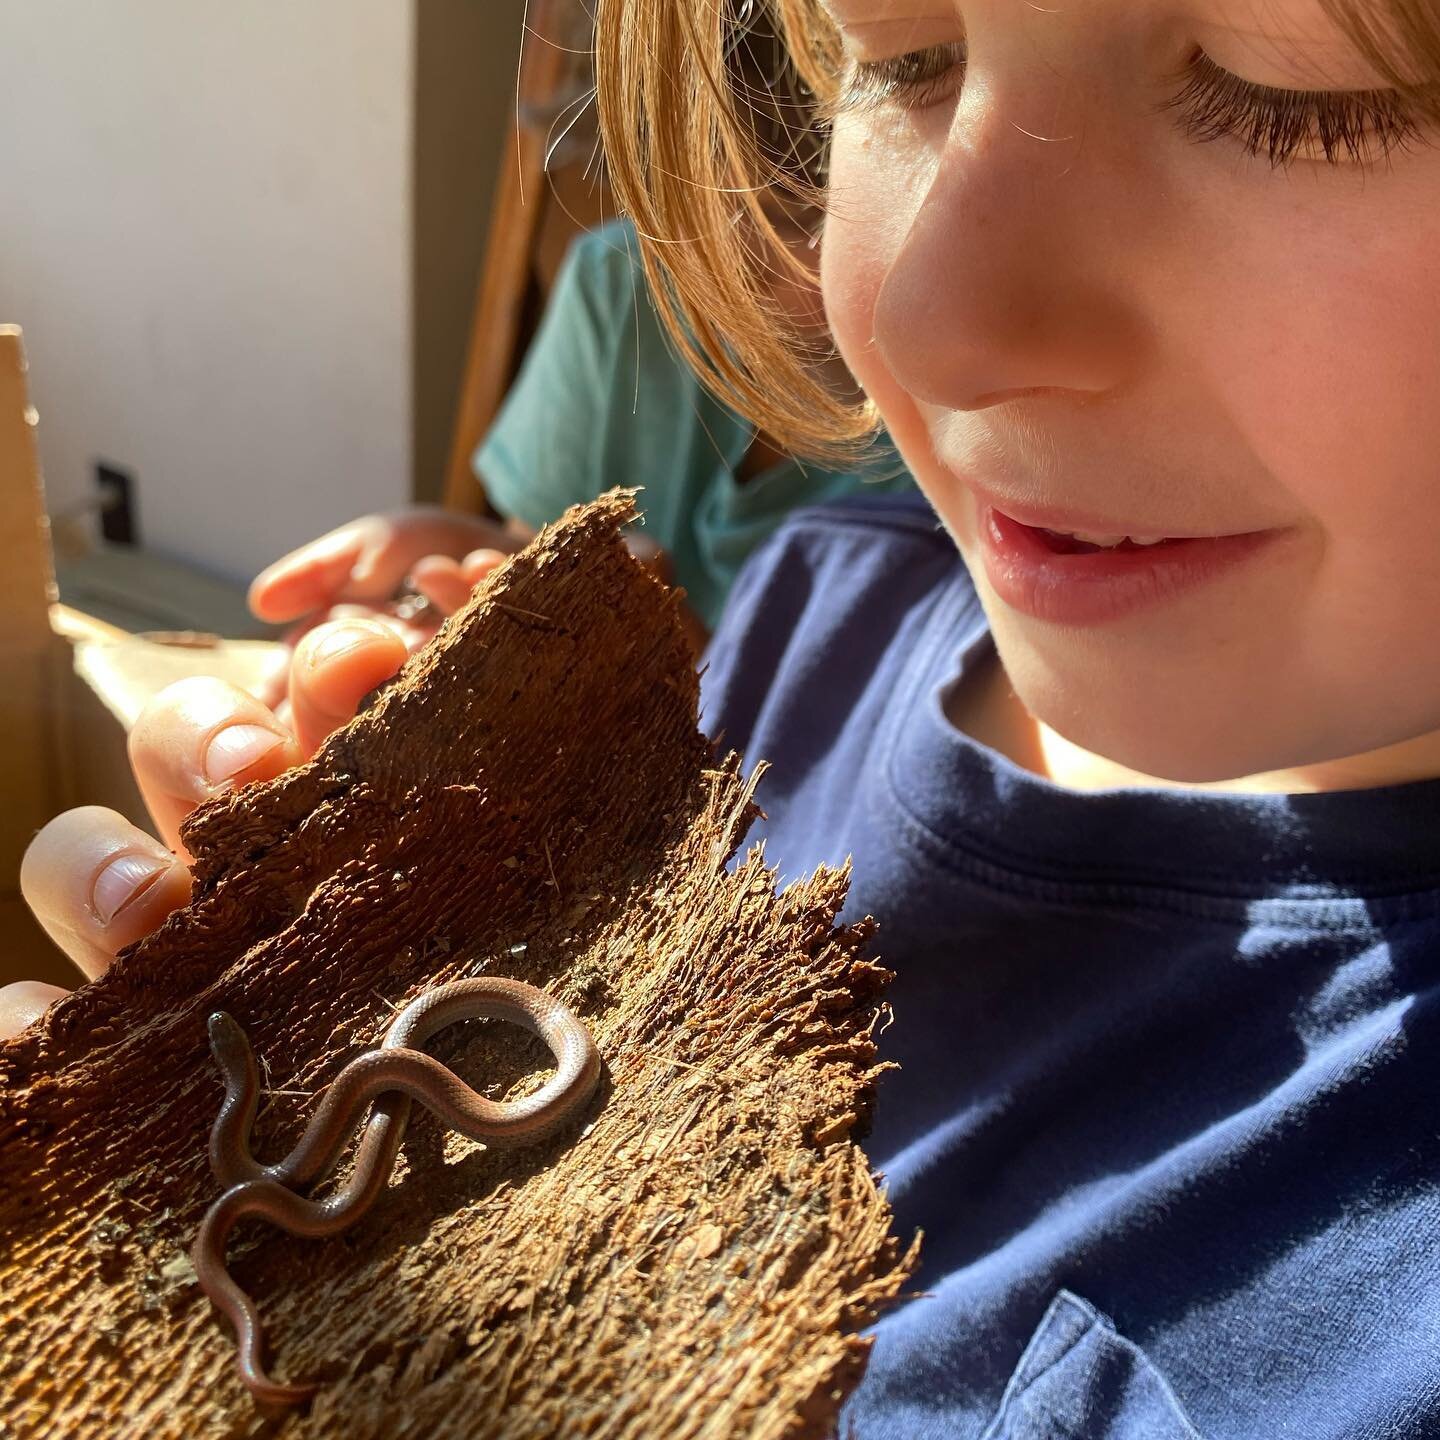 Getting up close and personal with two baby sharp-tailed snakes. These little fellers are going right back where I found them, but couldn&rsquo;t resist the opportunity to give the kiddos a chance to say hi. Still feeling guilty about moving them in 